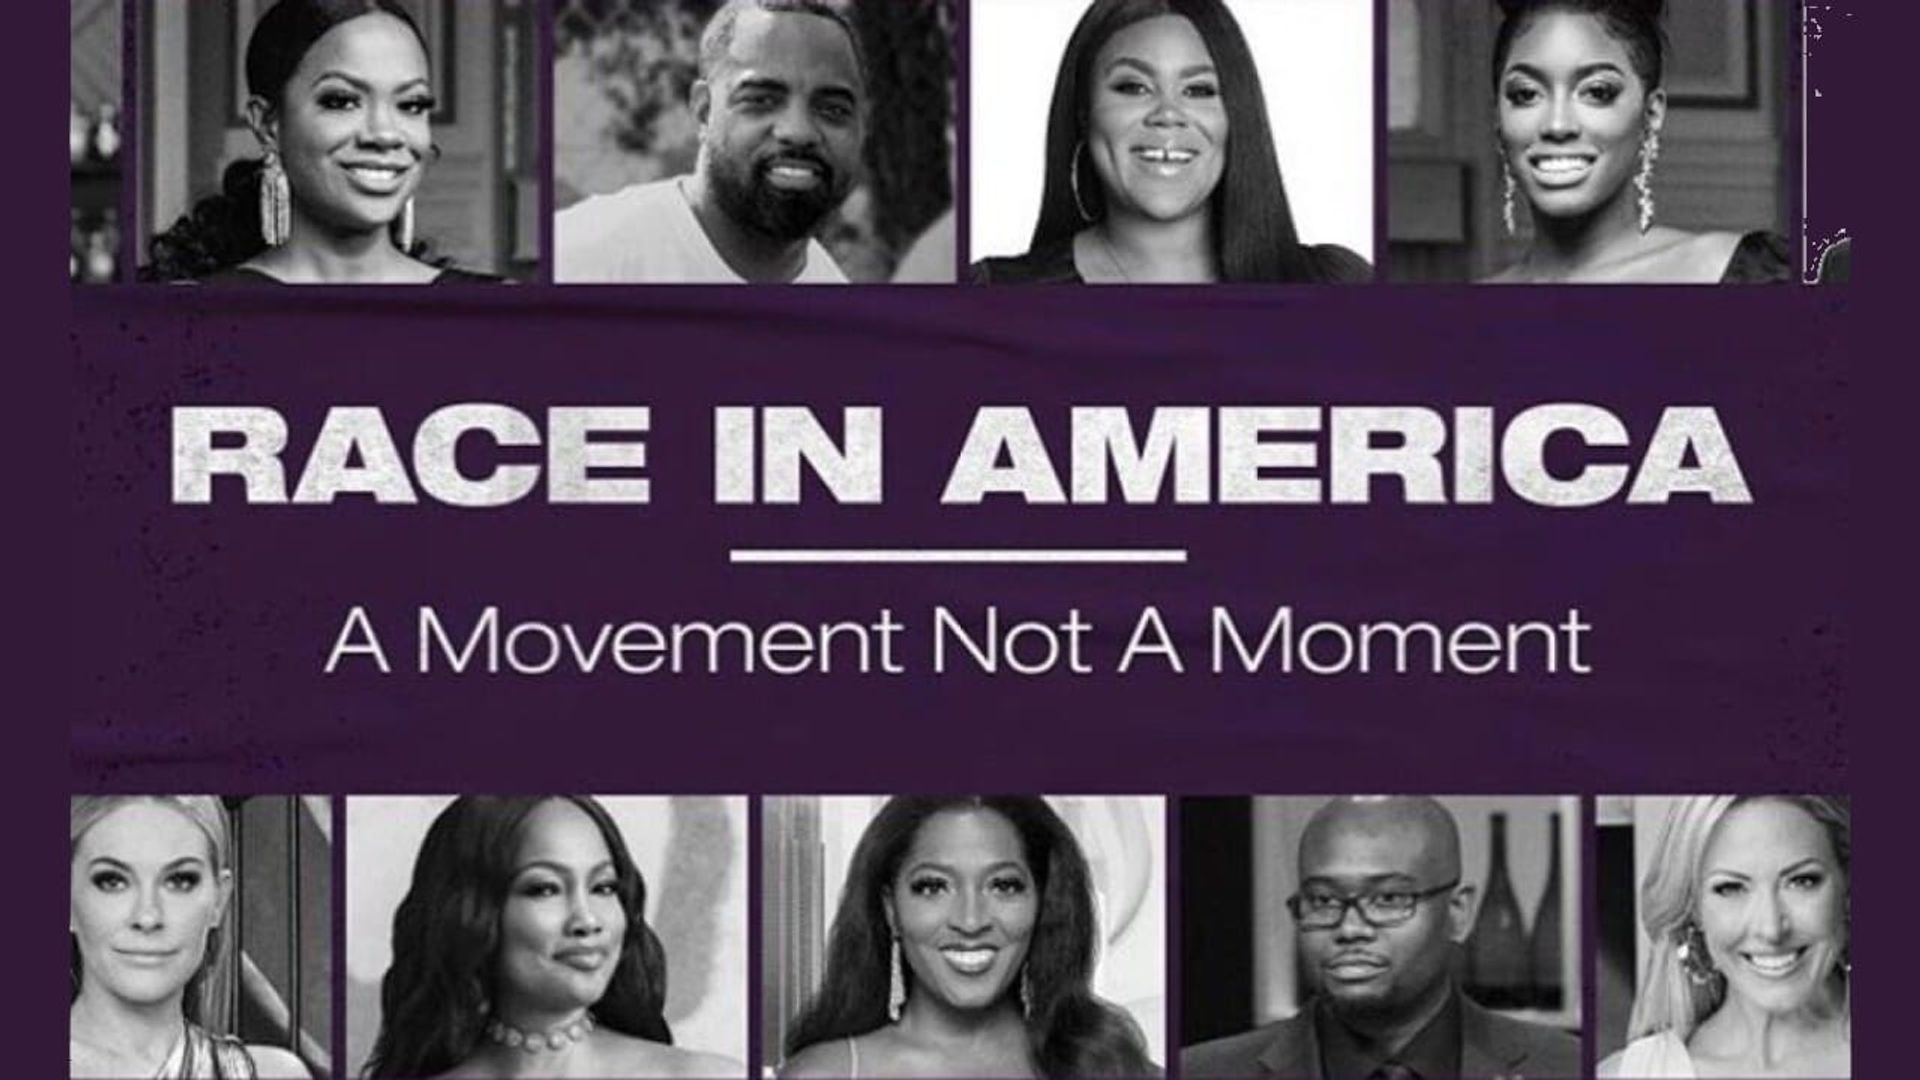 Race in America: A Movement Not A Moment background